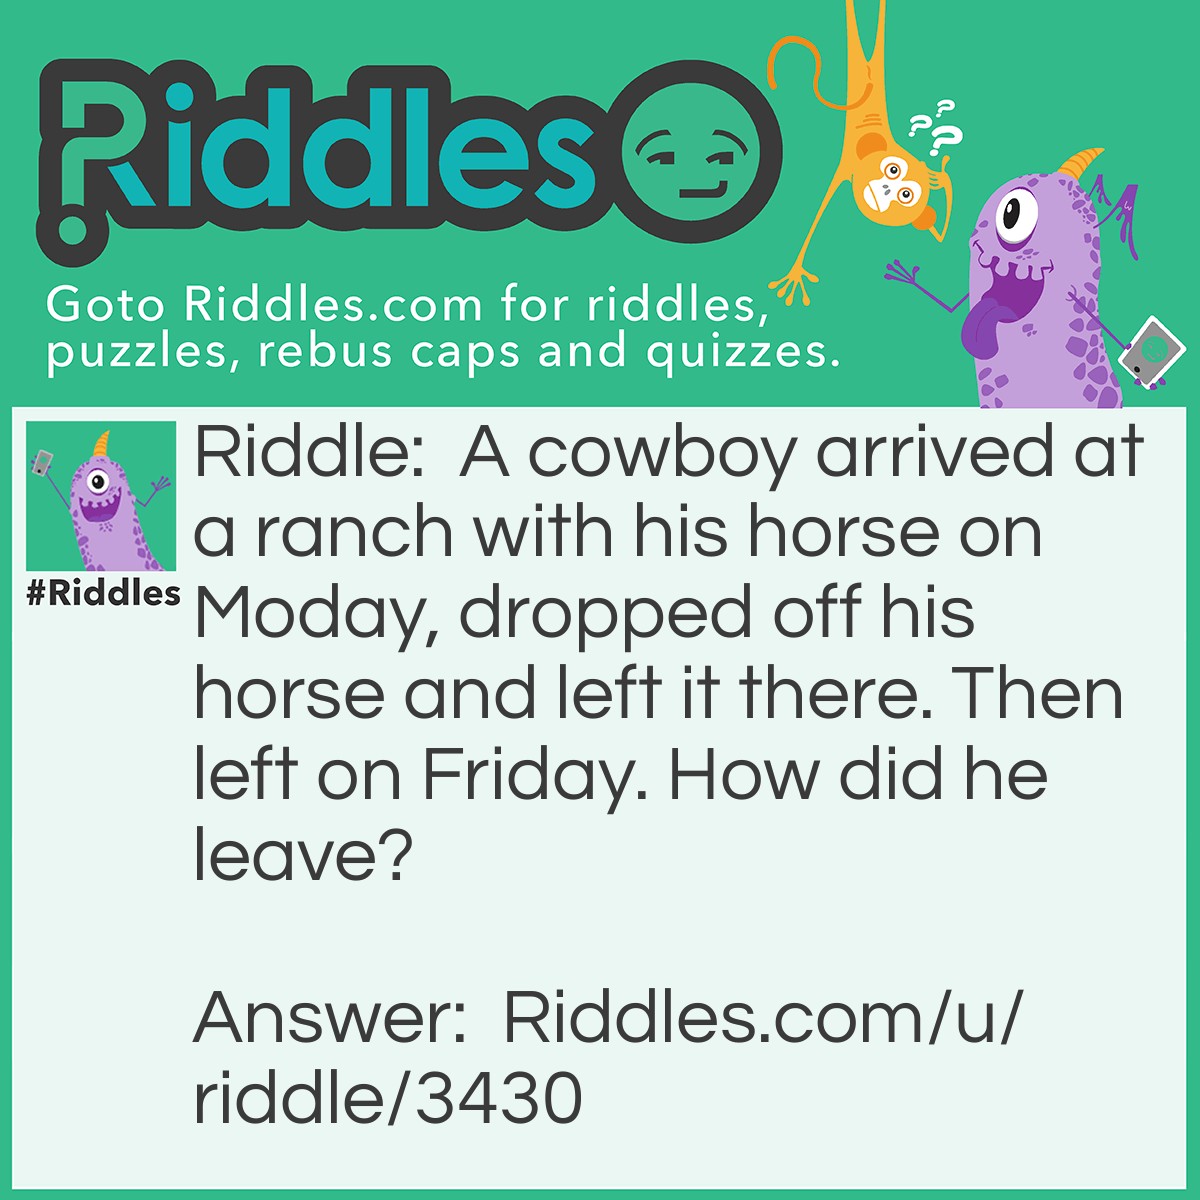 Riddle: A cowboy arrived at a ranch with his horse on Moday, dropped off his horse and left it there. Then left on Friday. How did he leave? Answer: His horse was named Friday.